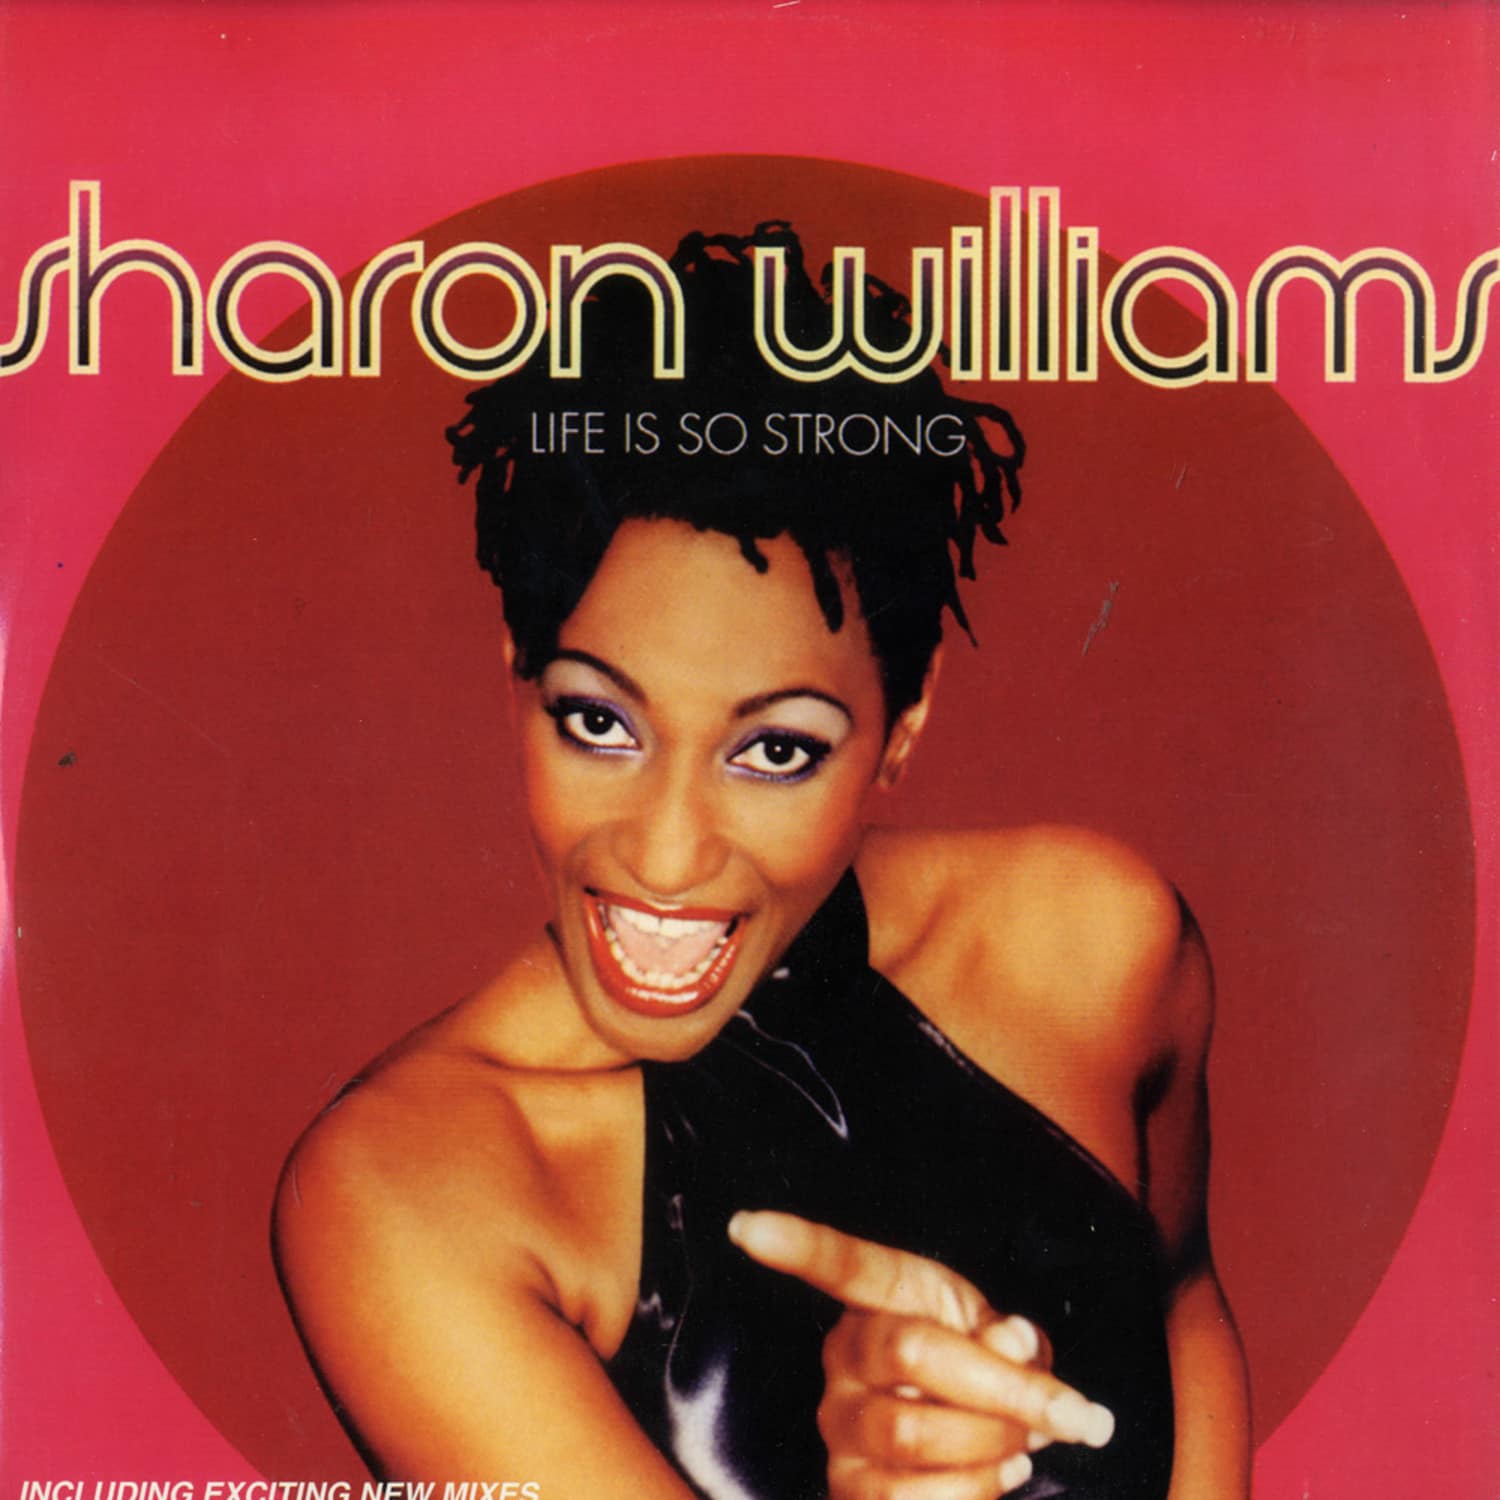 Sharon Williams - LIFE IS SO STRONG